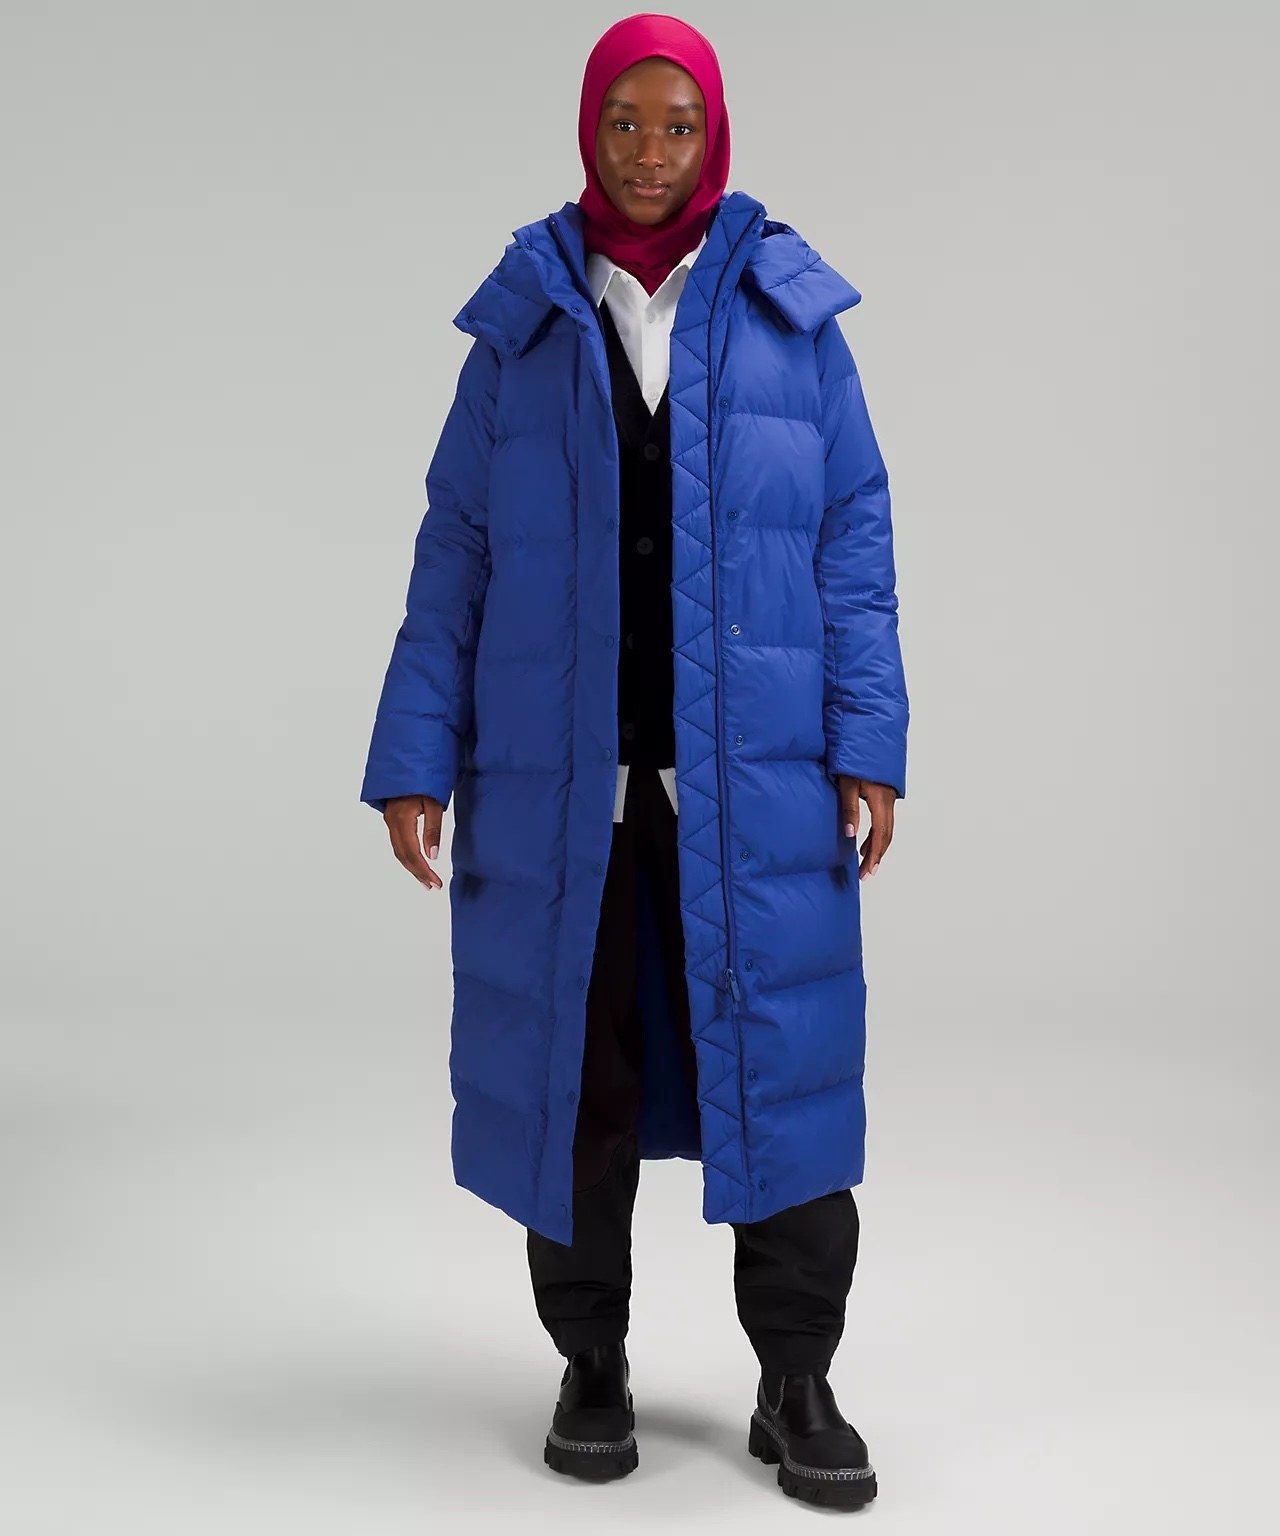 Model wearing blue puffer coat over black and white outfit